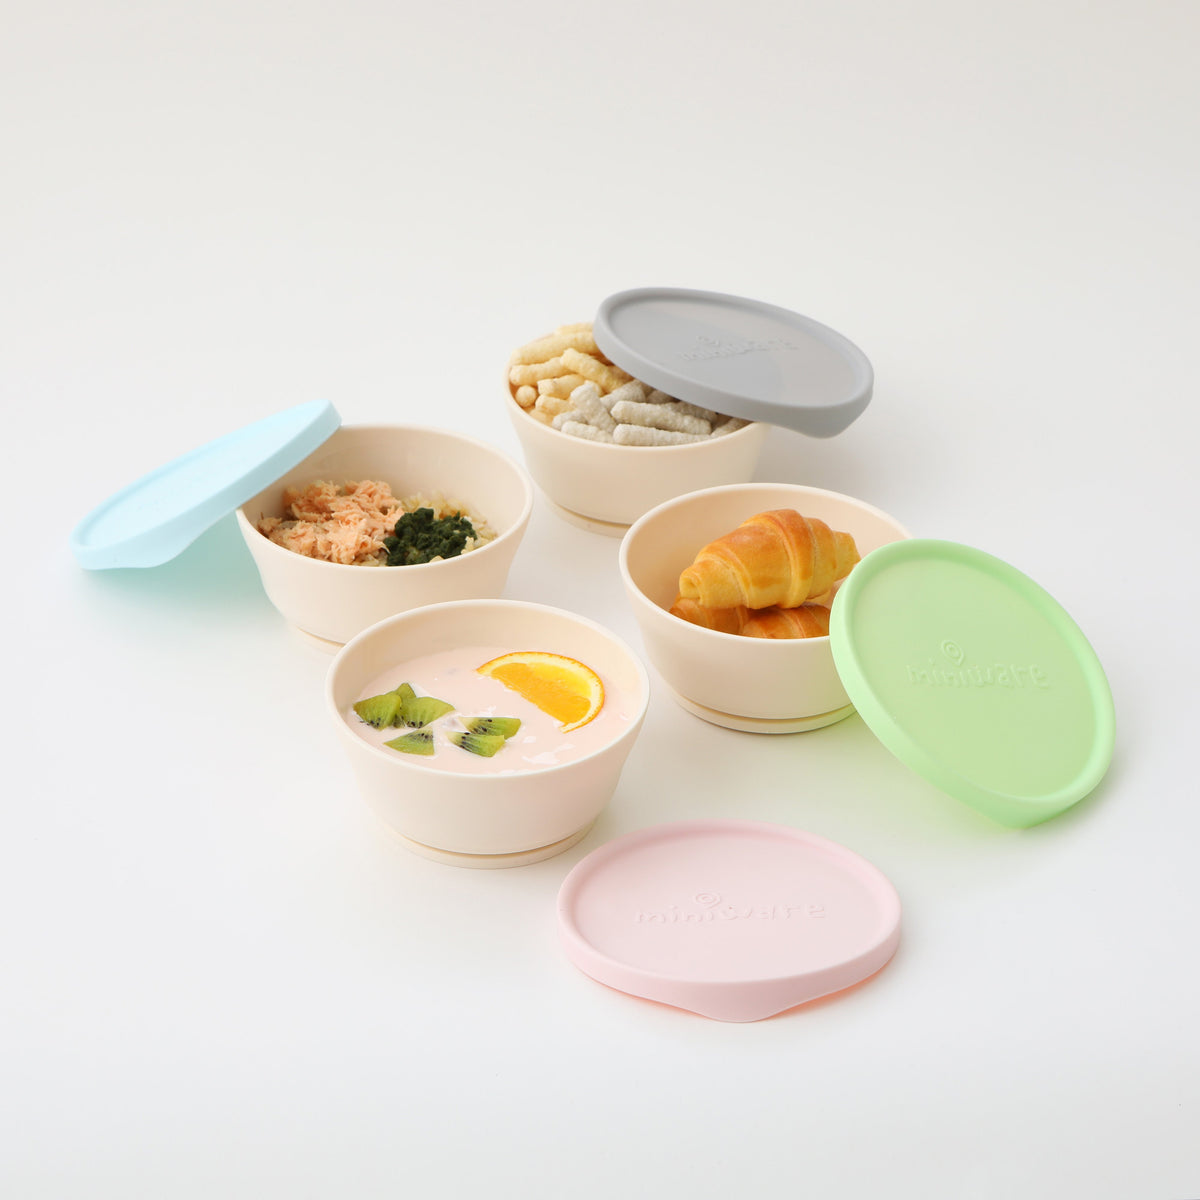 miniware-first-bite-set-pla-cereal-suction-bowl-vanilla-+-silicone-spoon-and-cover-in-cotton-keylime- (10)